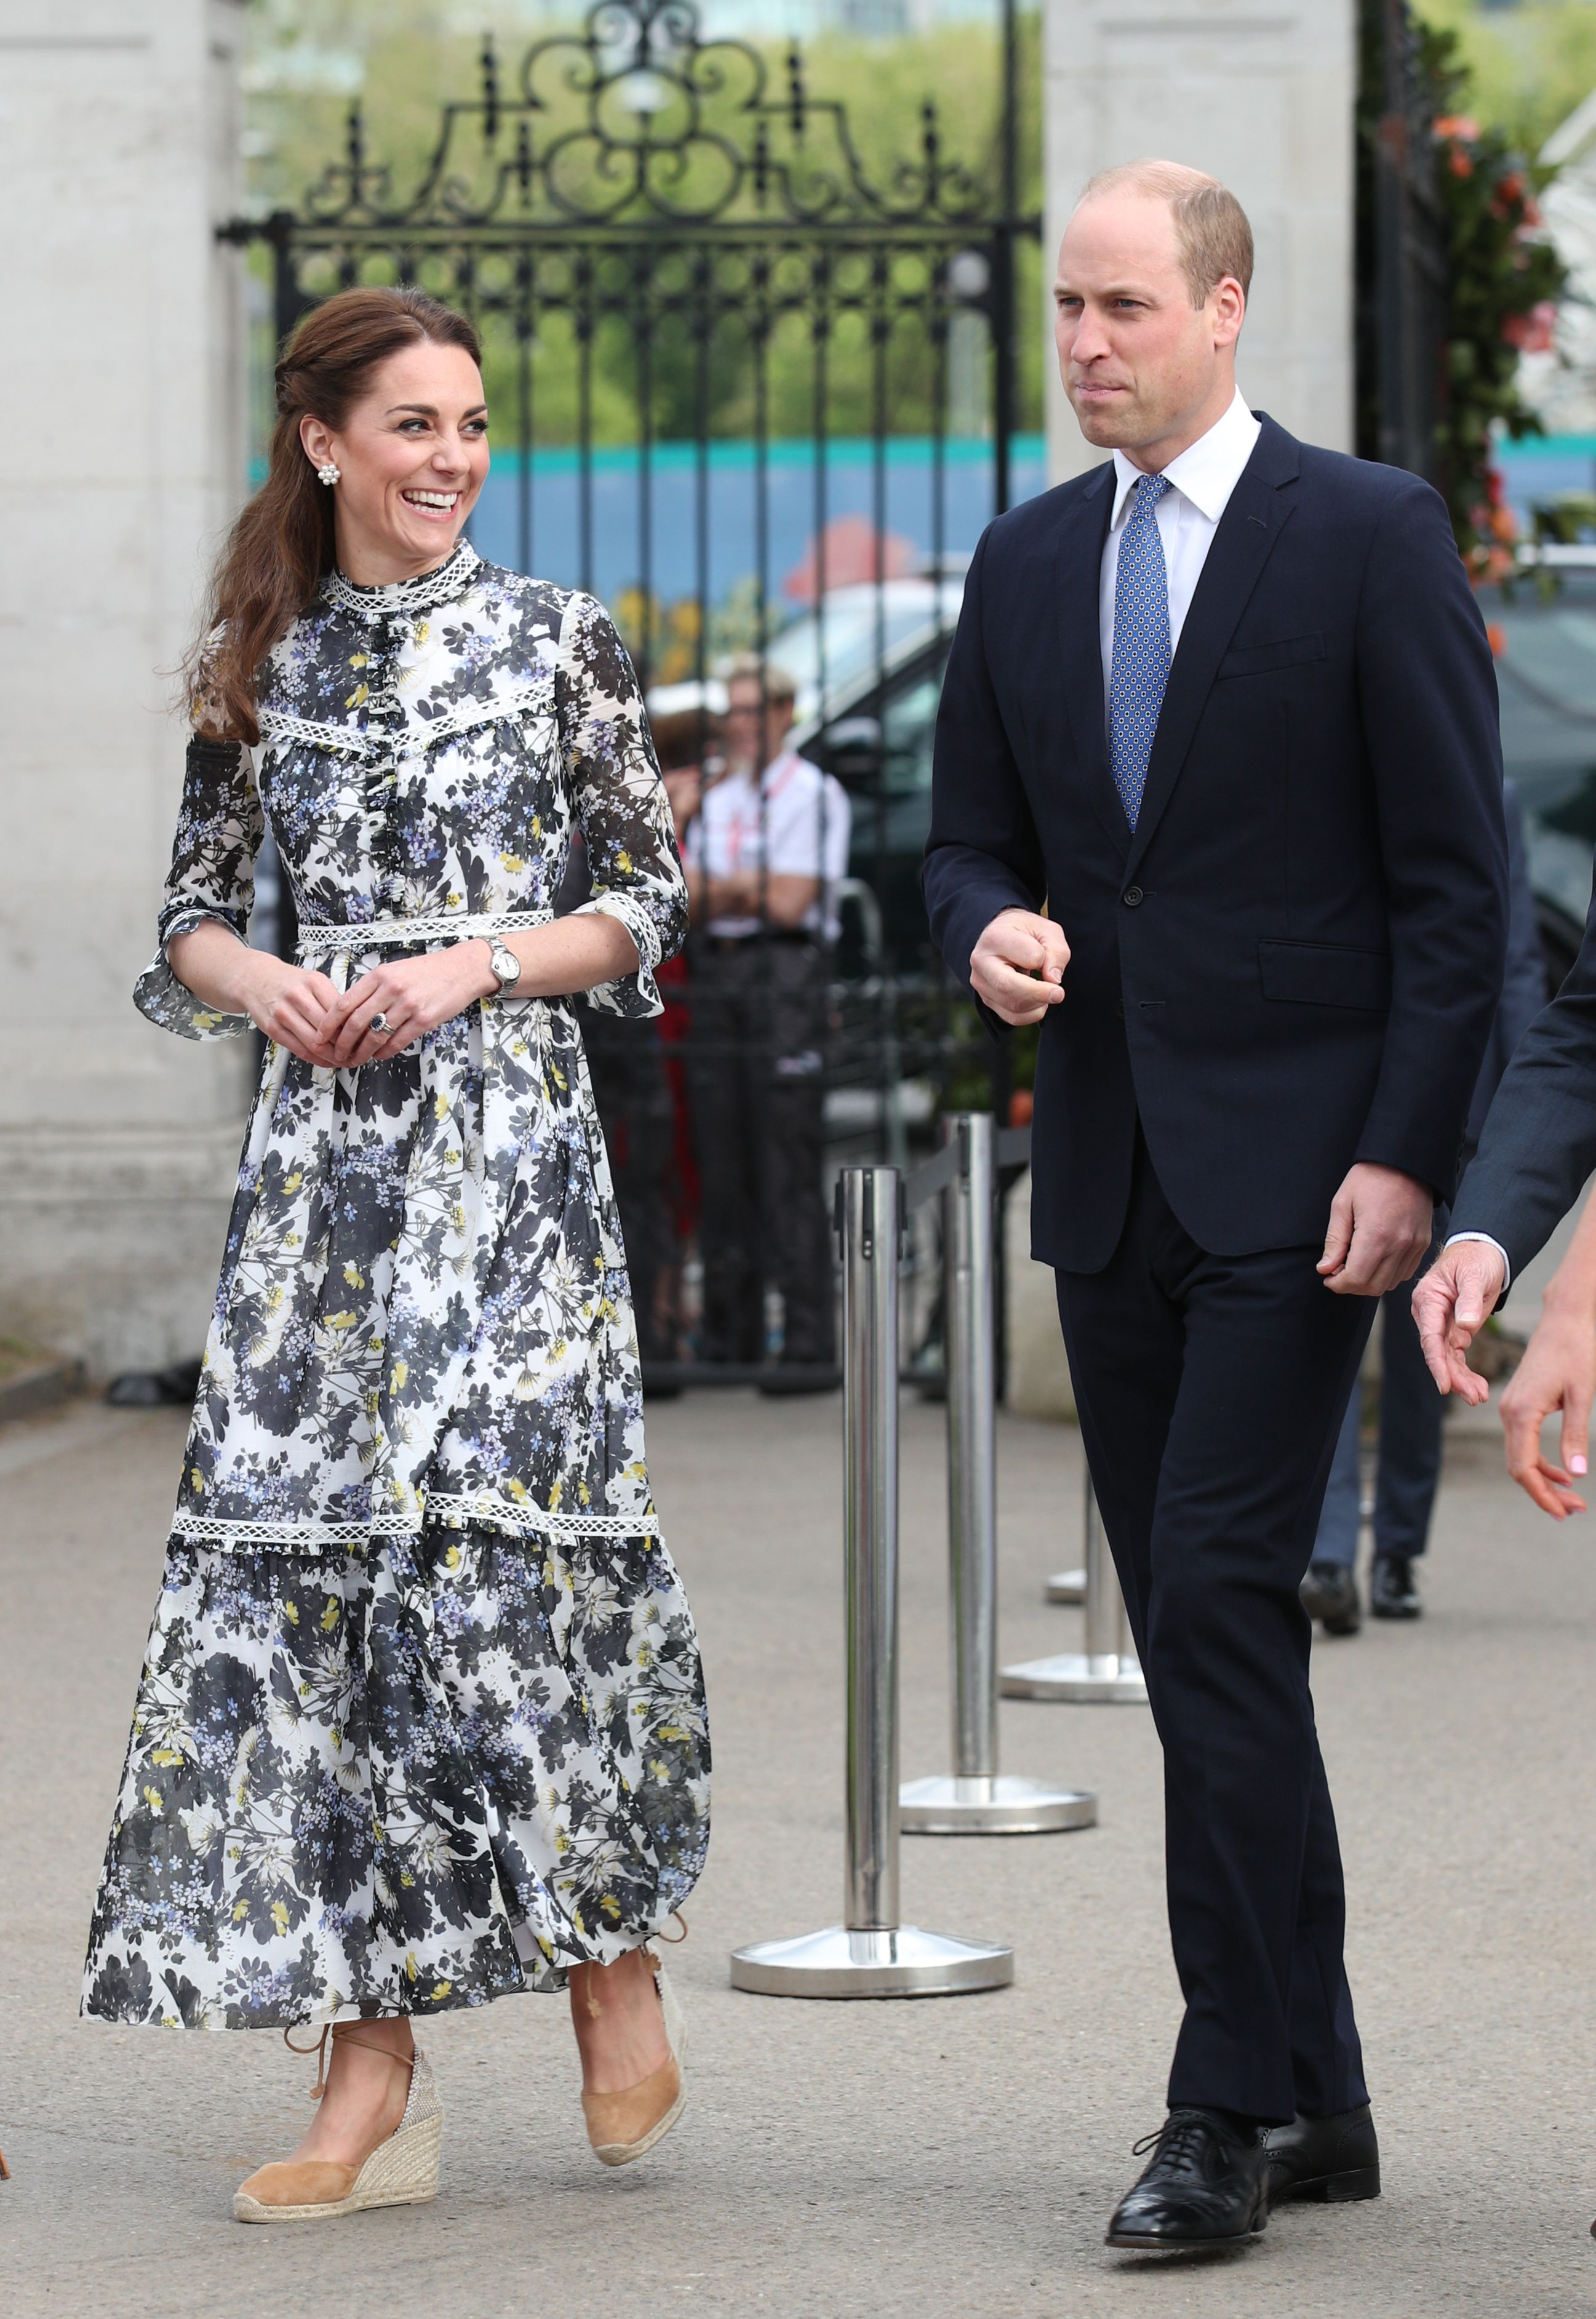 prince-william-and-catherine-duchess-of-cambridge-at-the-news-photo-1596042012.jpg